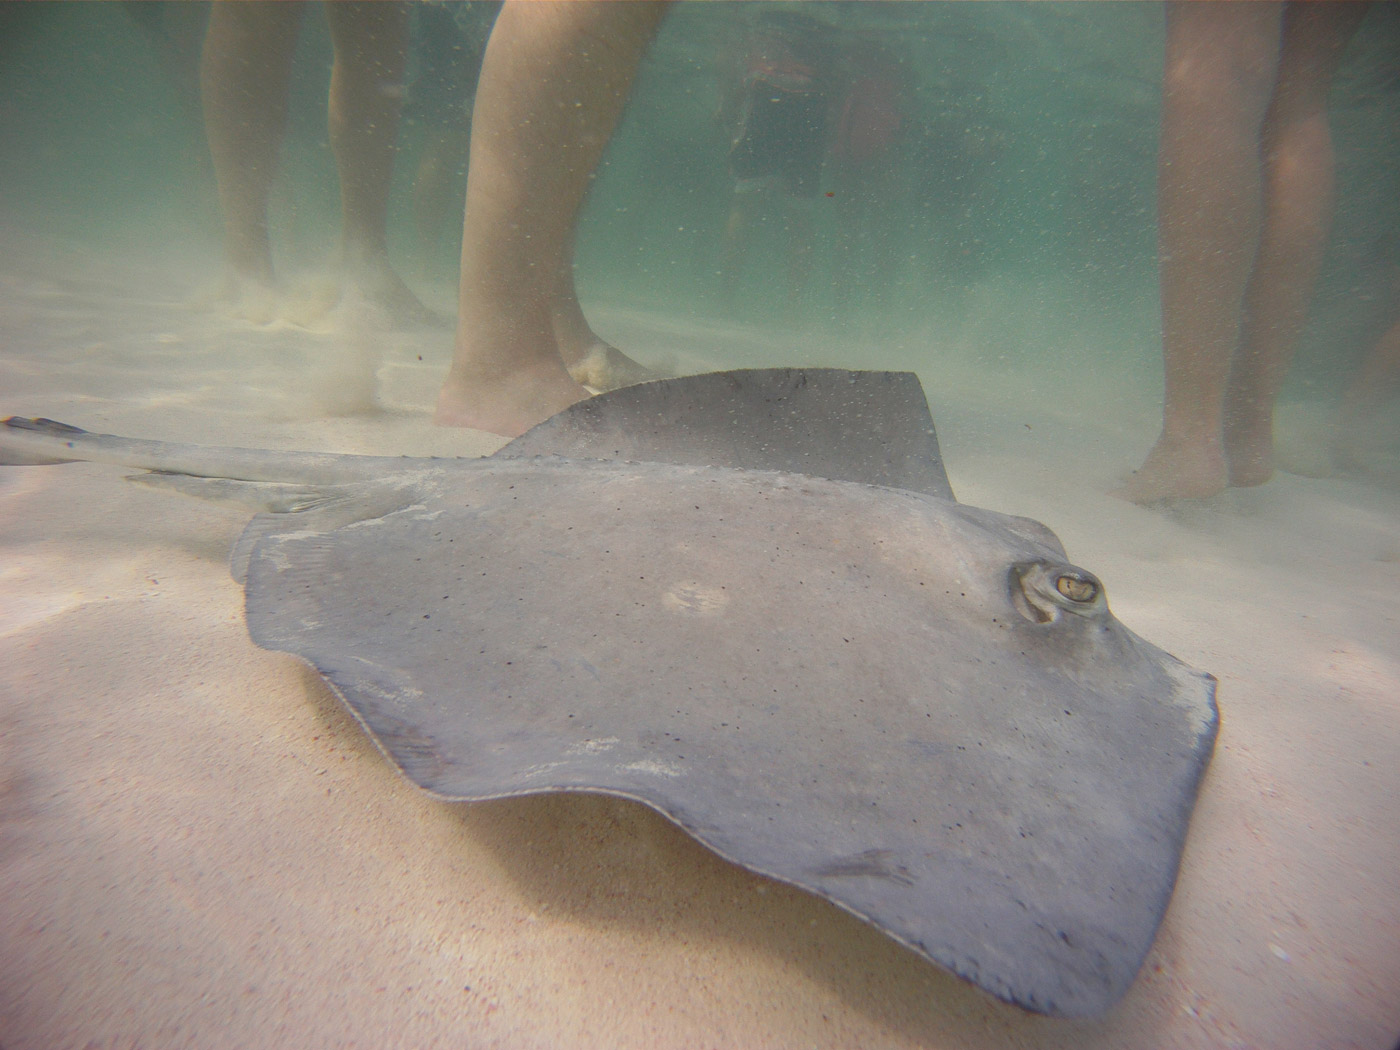 Stingrays by peoples feet